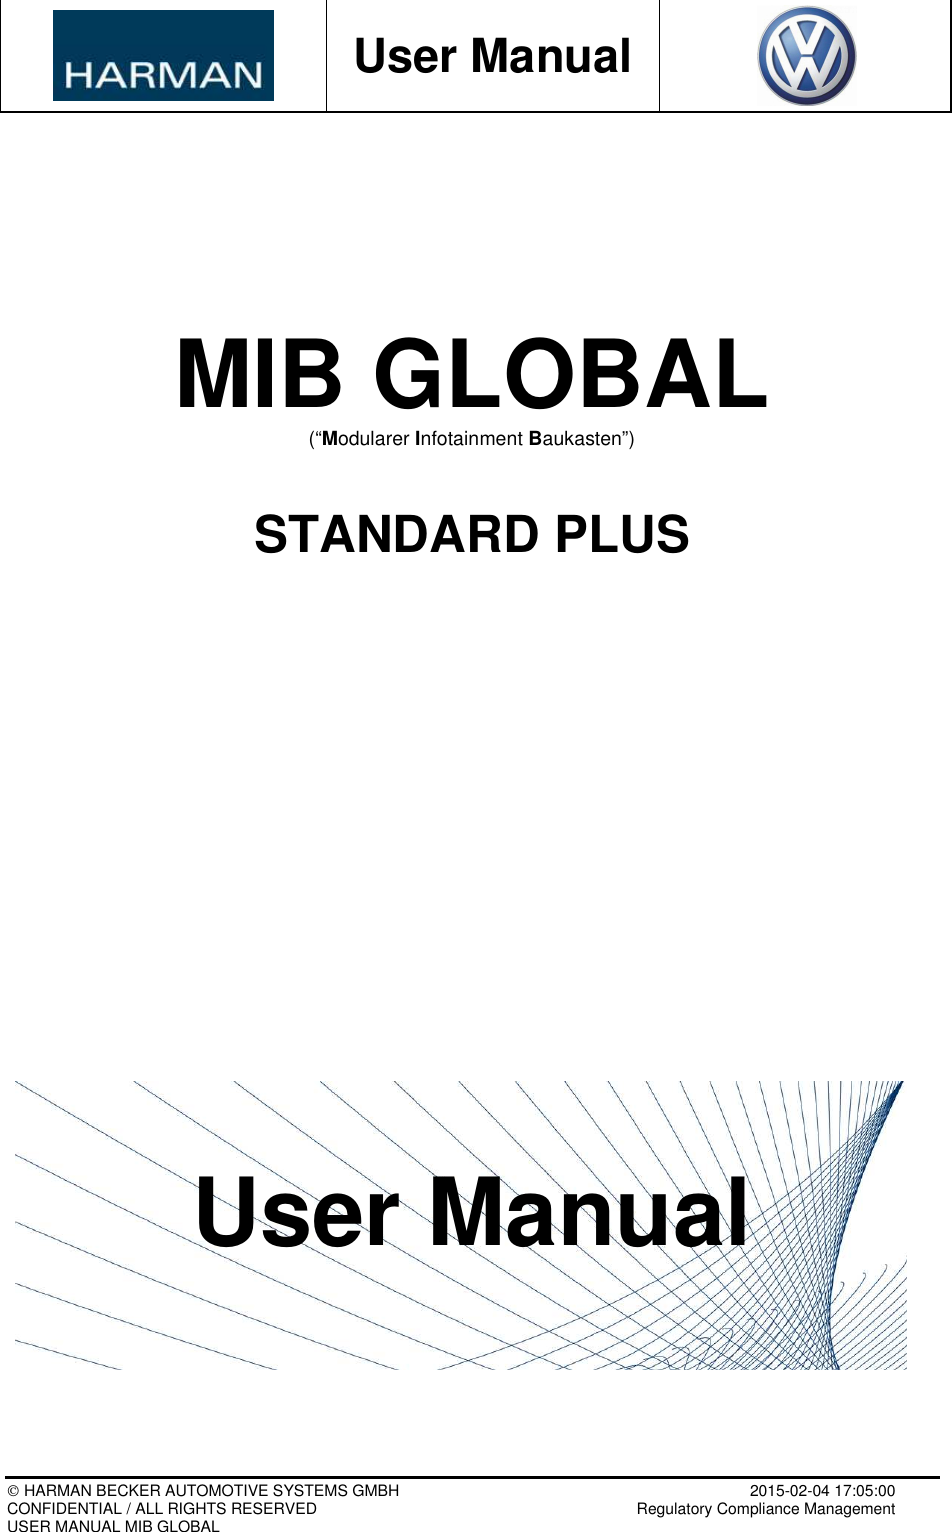           User Manual    HARMAN BECKER AUTOMOTIVE SYSTEMS GMBH    2015-02-04 17:05:00 CONFIDENTIAL / ALL RIGHTS RESERVED     Regulatory Compliance Management USER MANUAL MIB GLOBAL     MIB GLOBAL (“Modularer Infotainment Baukasten”)   STANDARD PLUS                       User Manual      